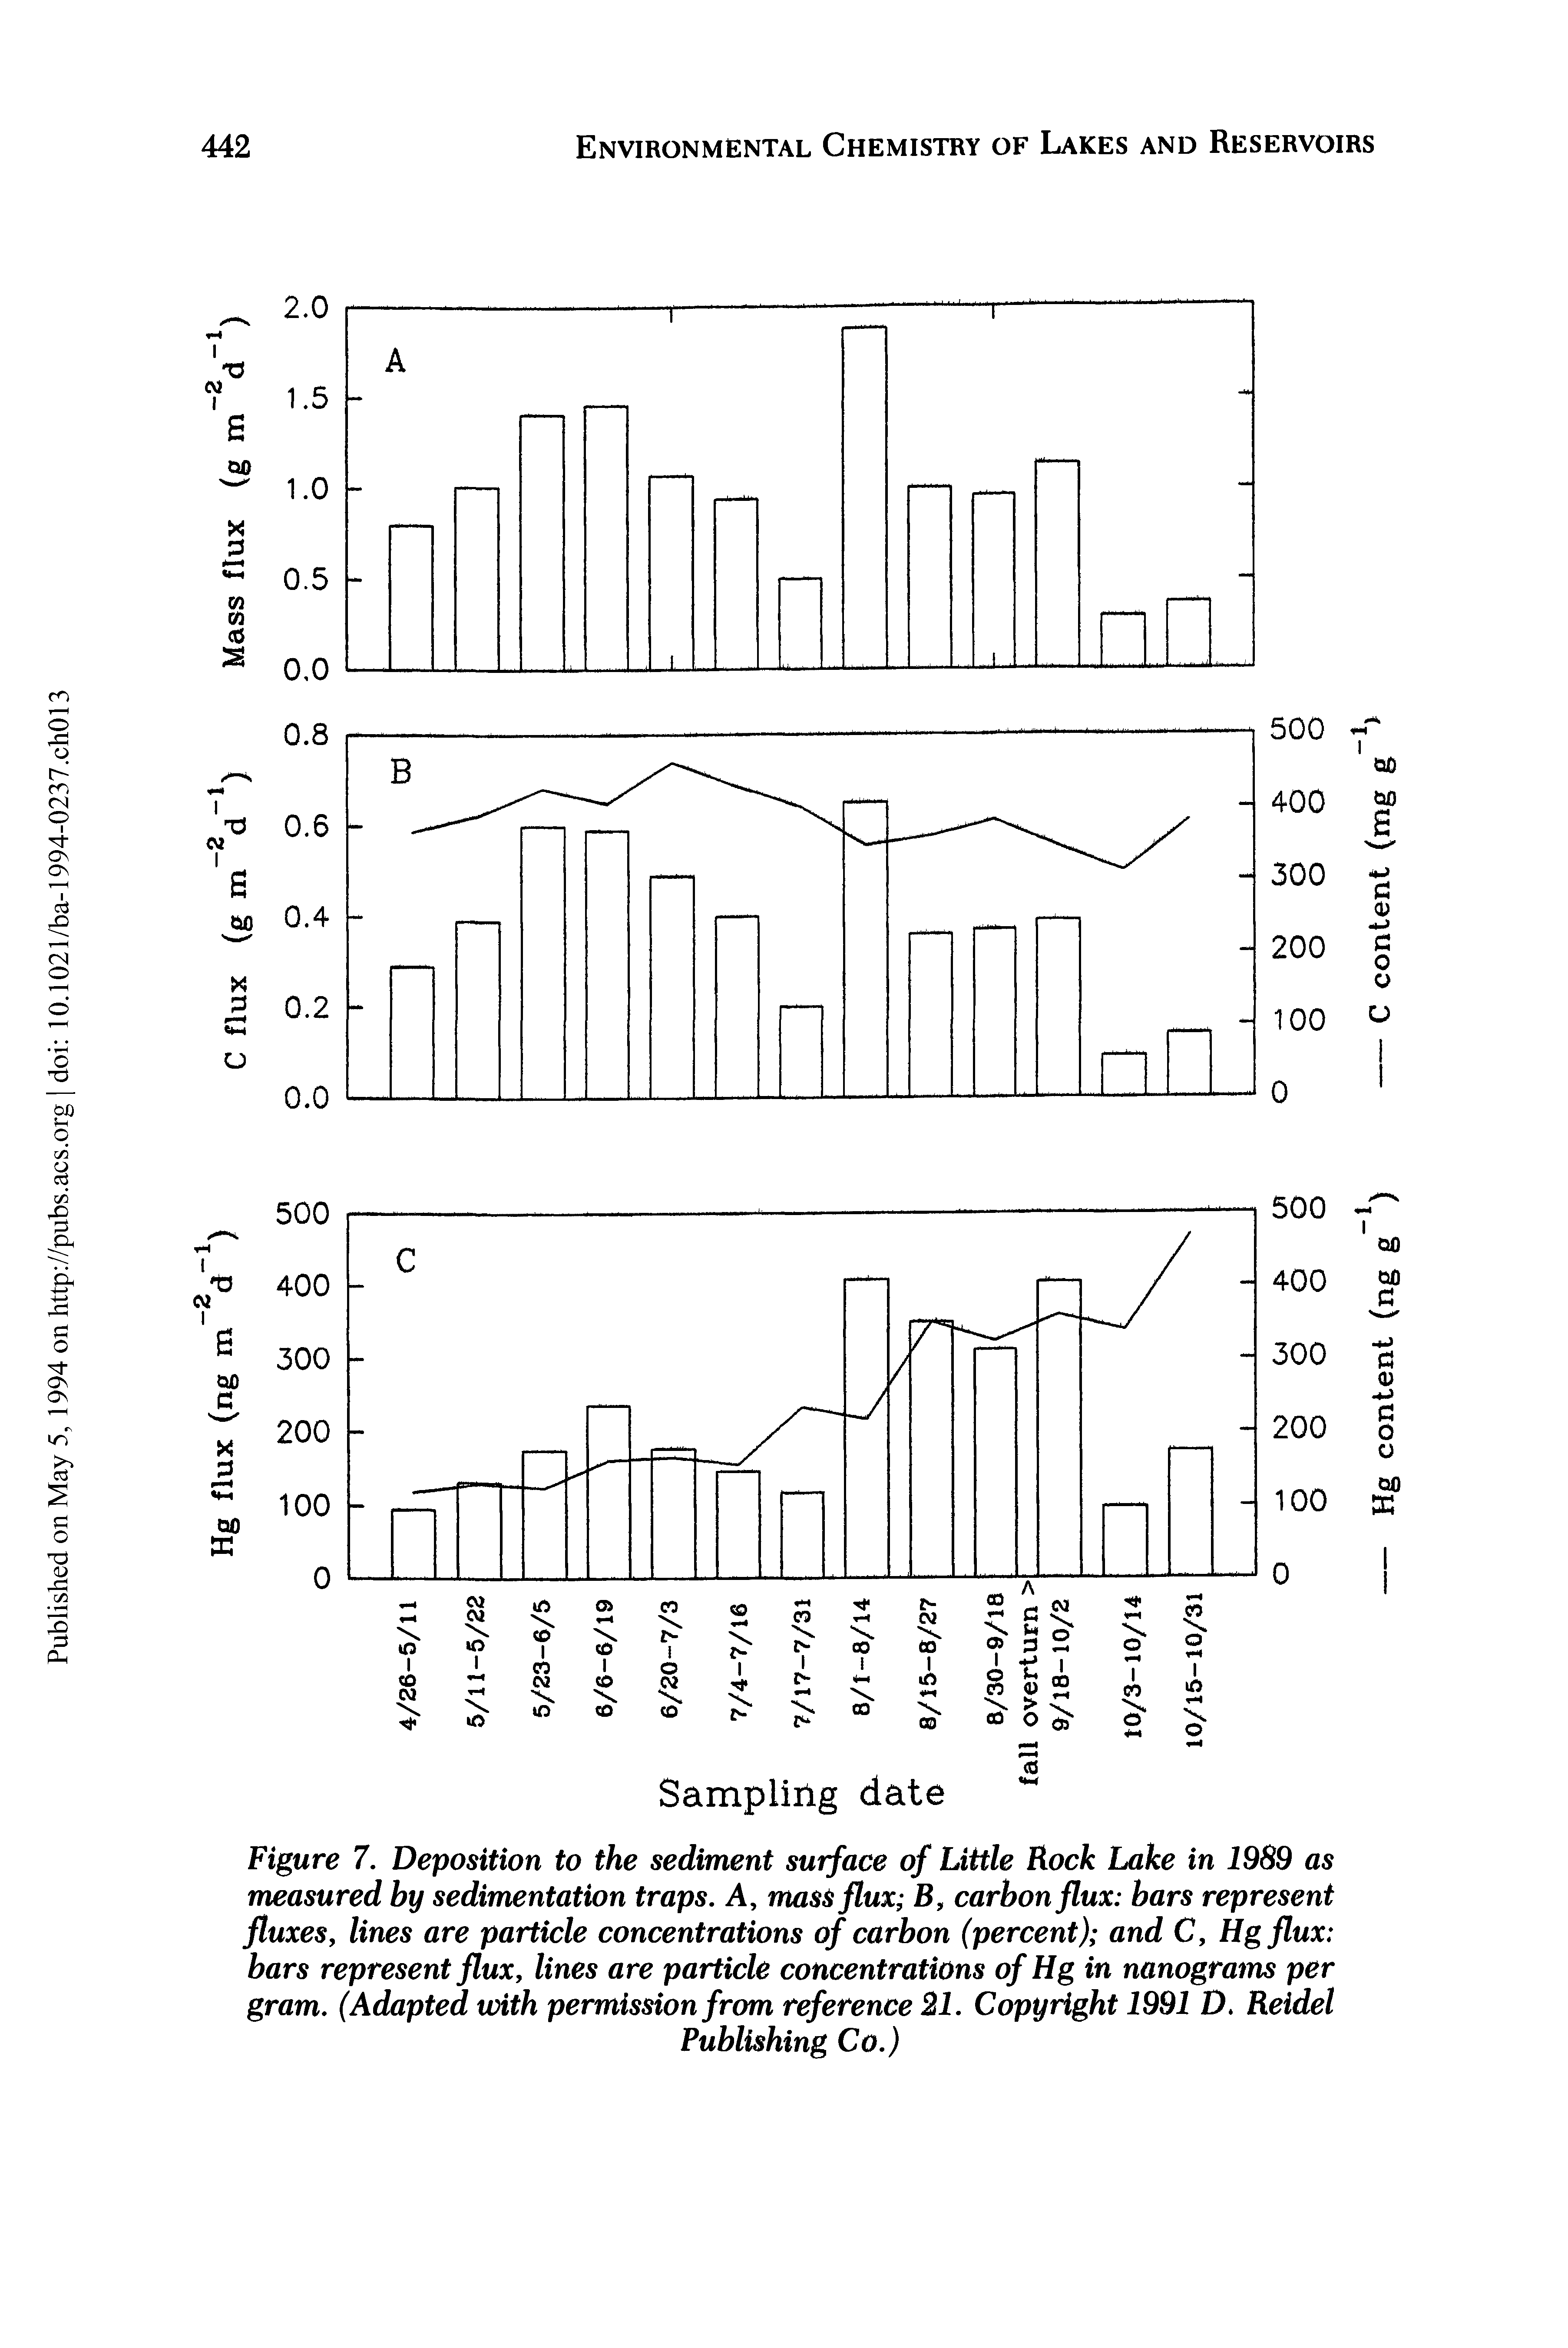 Figure 7. Deposition to the sediment surface of Little Rock Lake in 1989 as measured by sedimentation traps. A, mass flux B, carbon flux bars represent fluxes, lines are particle concentrations of carbon (percent) and C, Hgflux bars represent flux, lines are particle concentrations of Hg in nanograms per gram. (Adapted with permission from reference 21. Copyright 1991 D. Reidel...